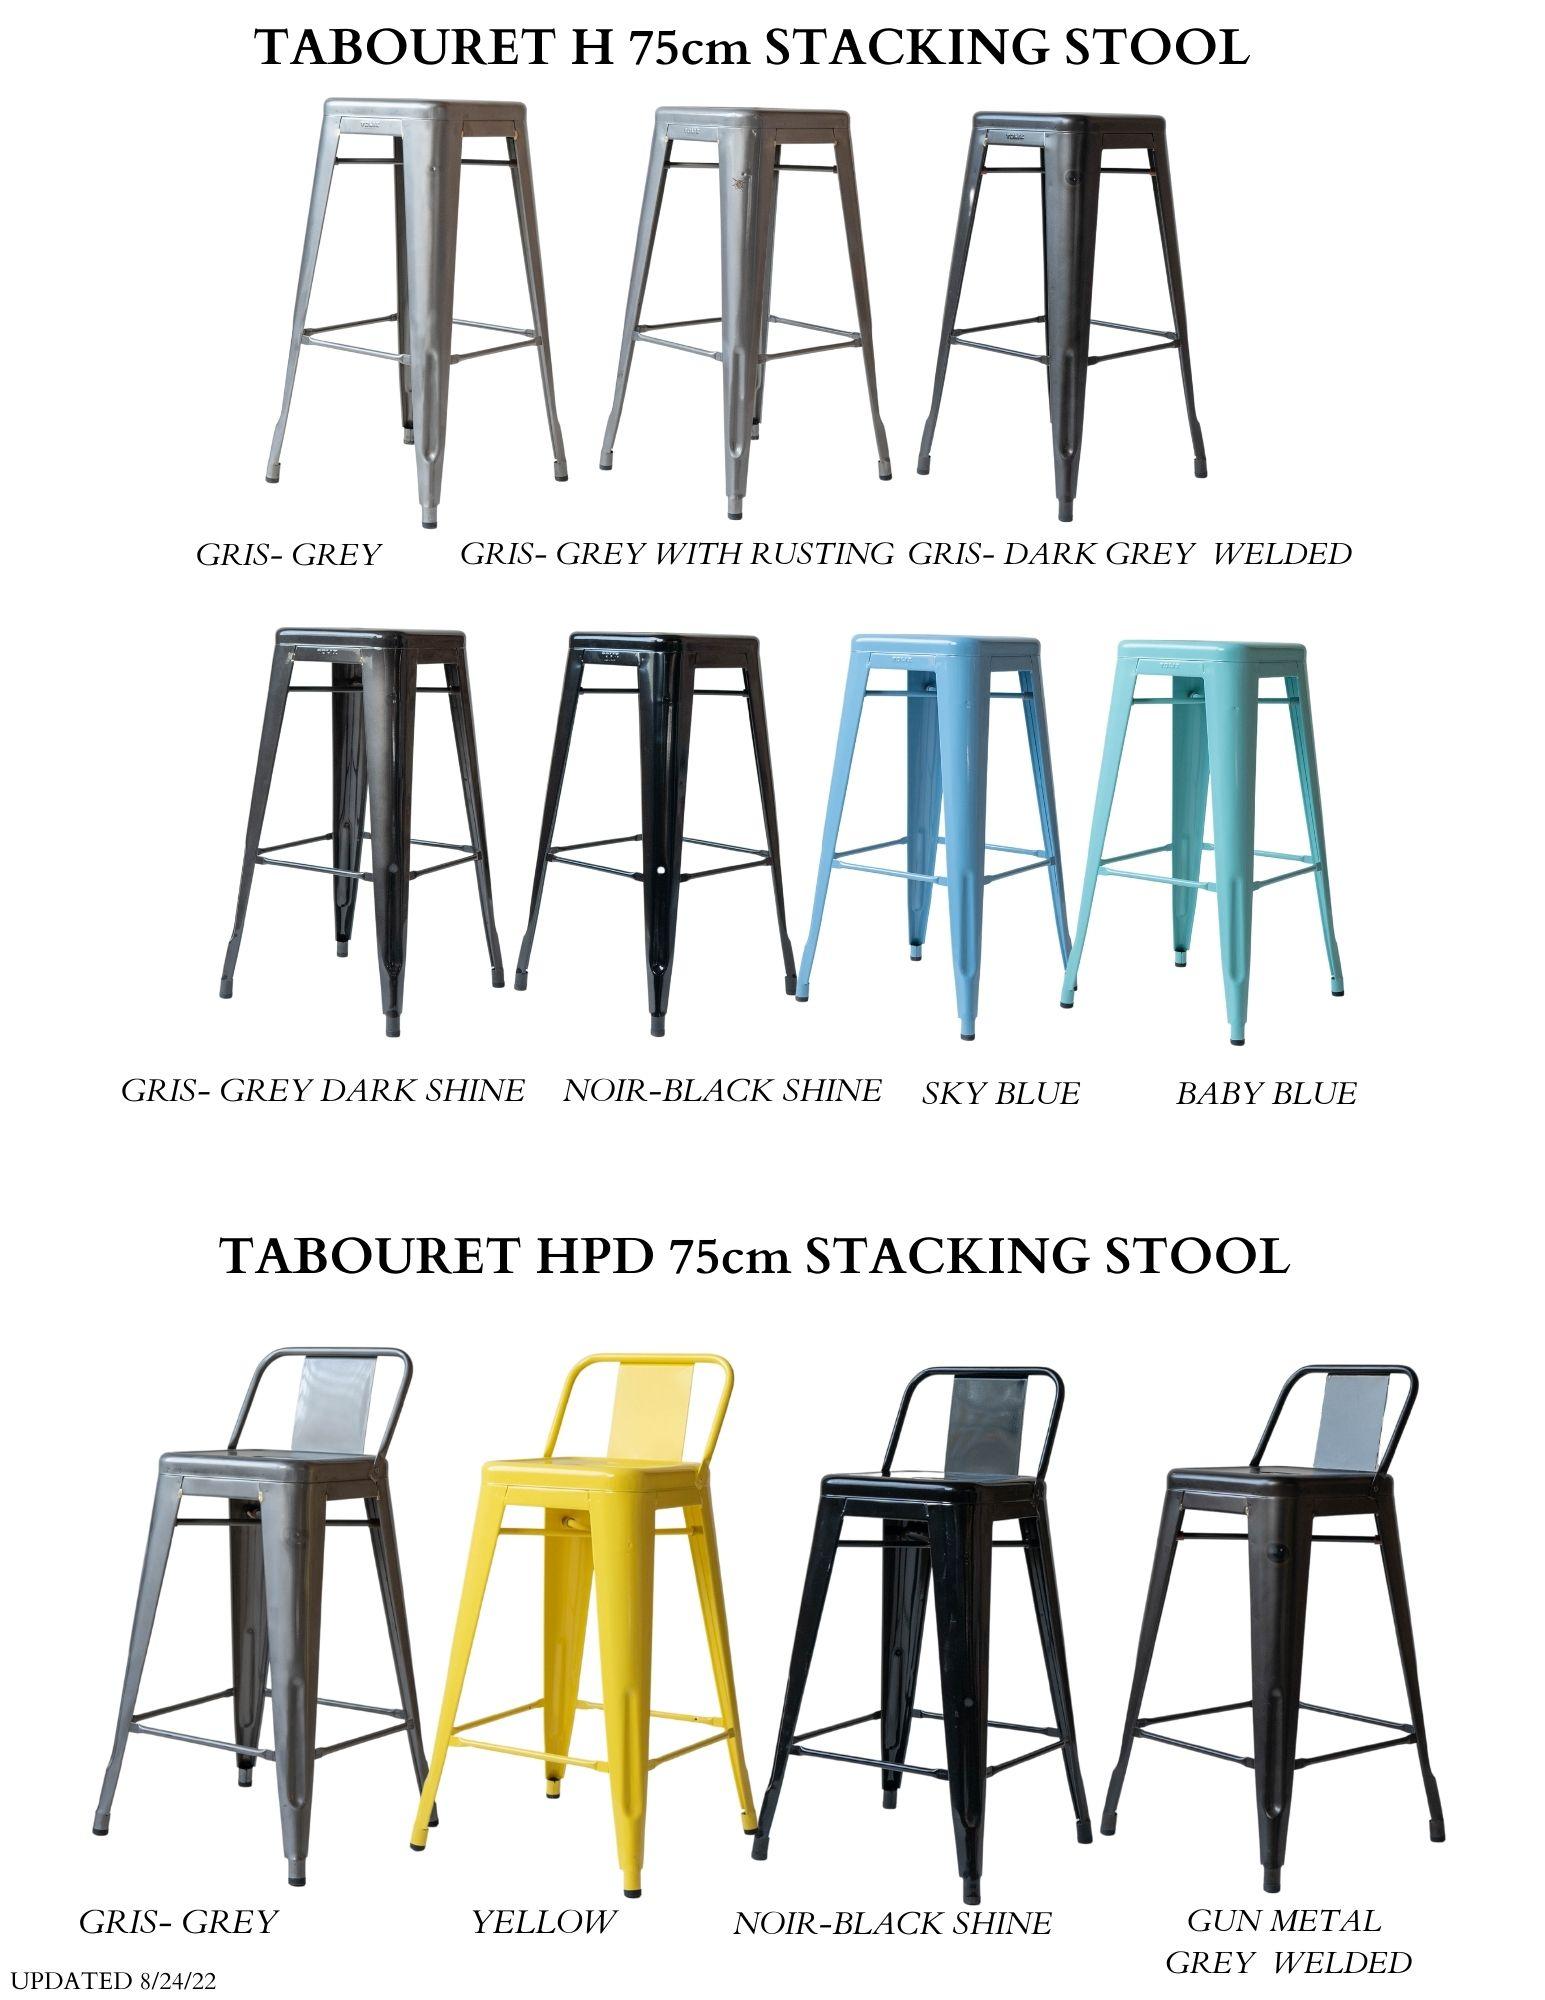 Genuine French Tolix Set of '4' Steel Stacking Stools Hundreds More in Stock 1